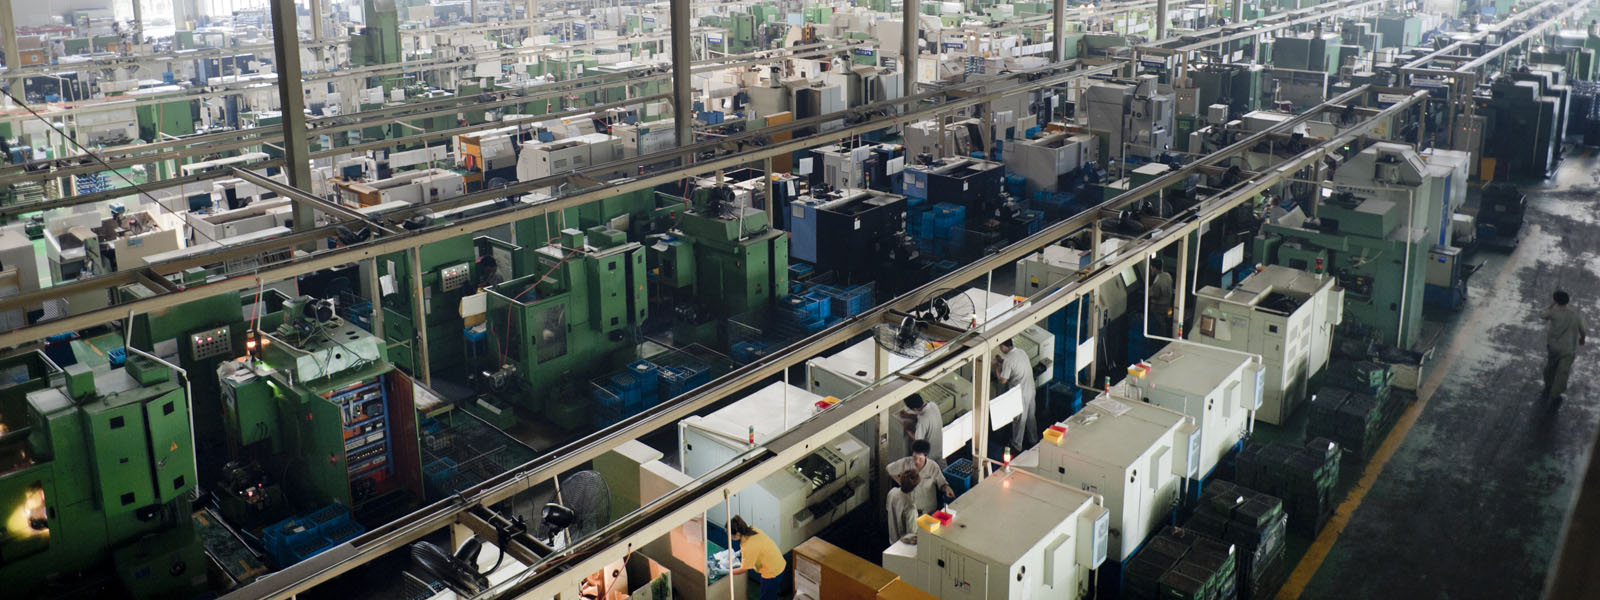 Facilities, Tooling & Equipment Are Complete For Increasing Production Capacity